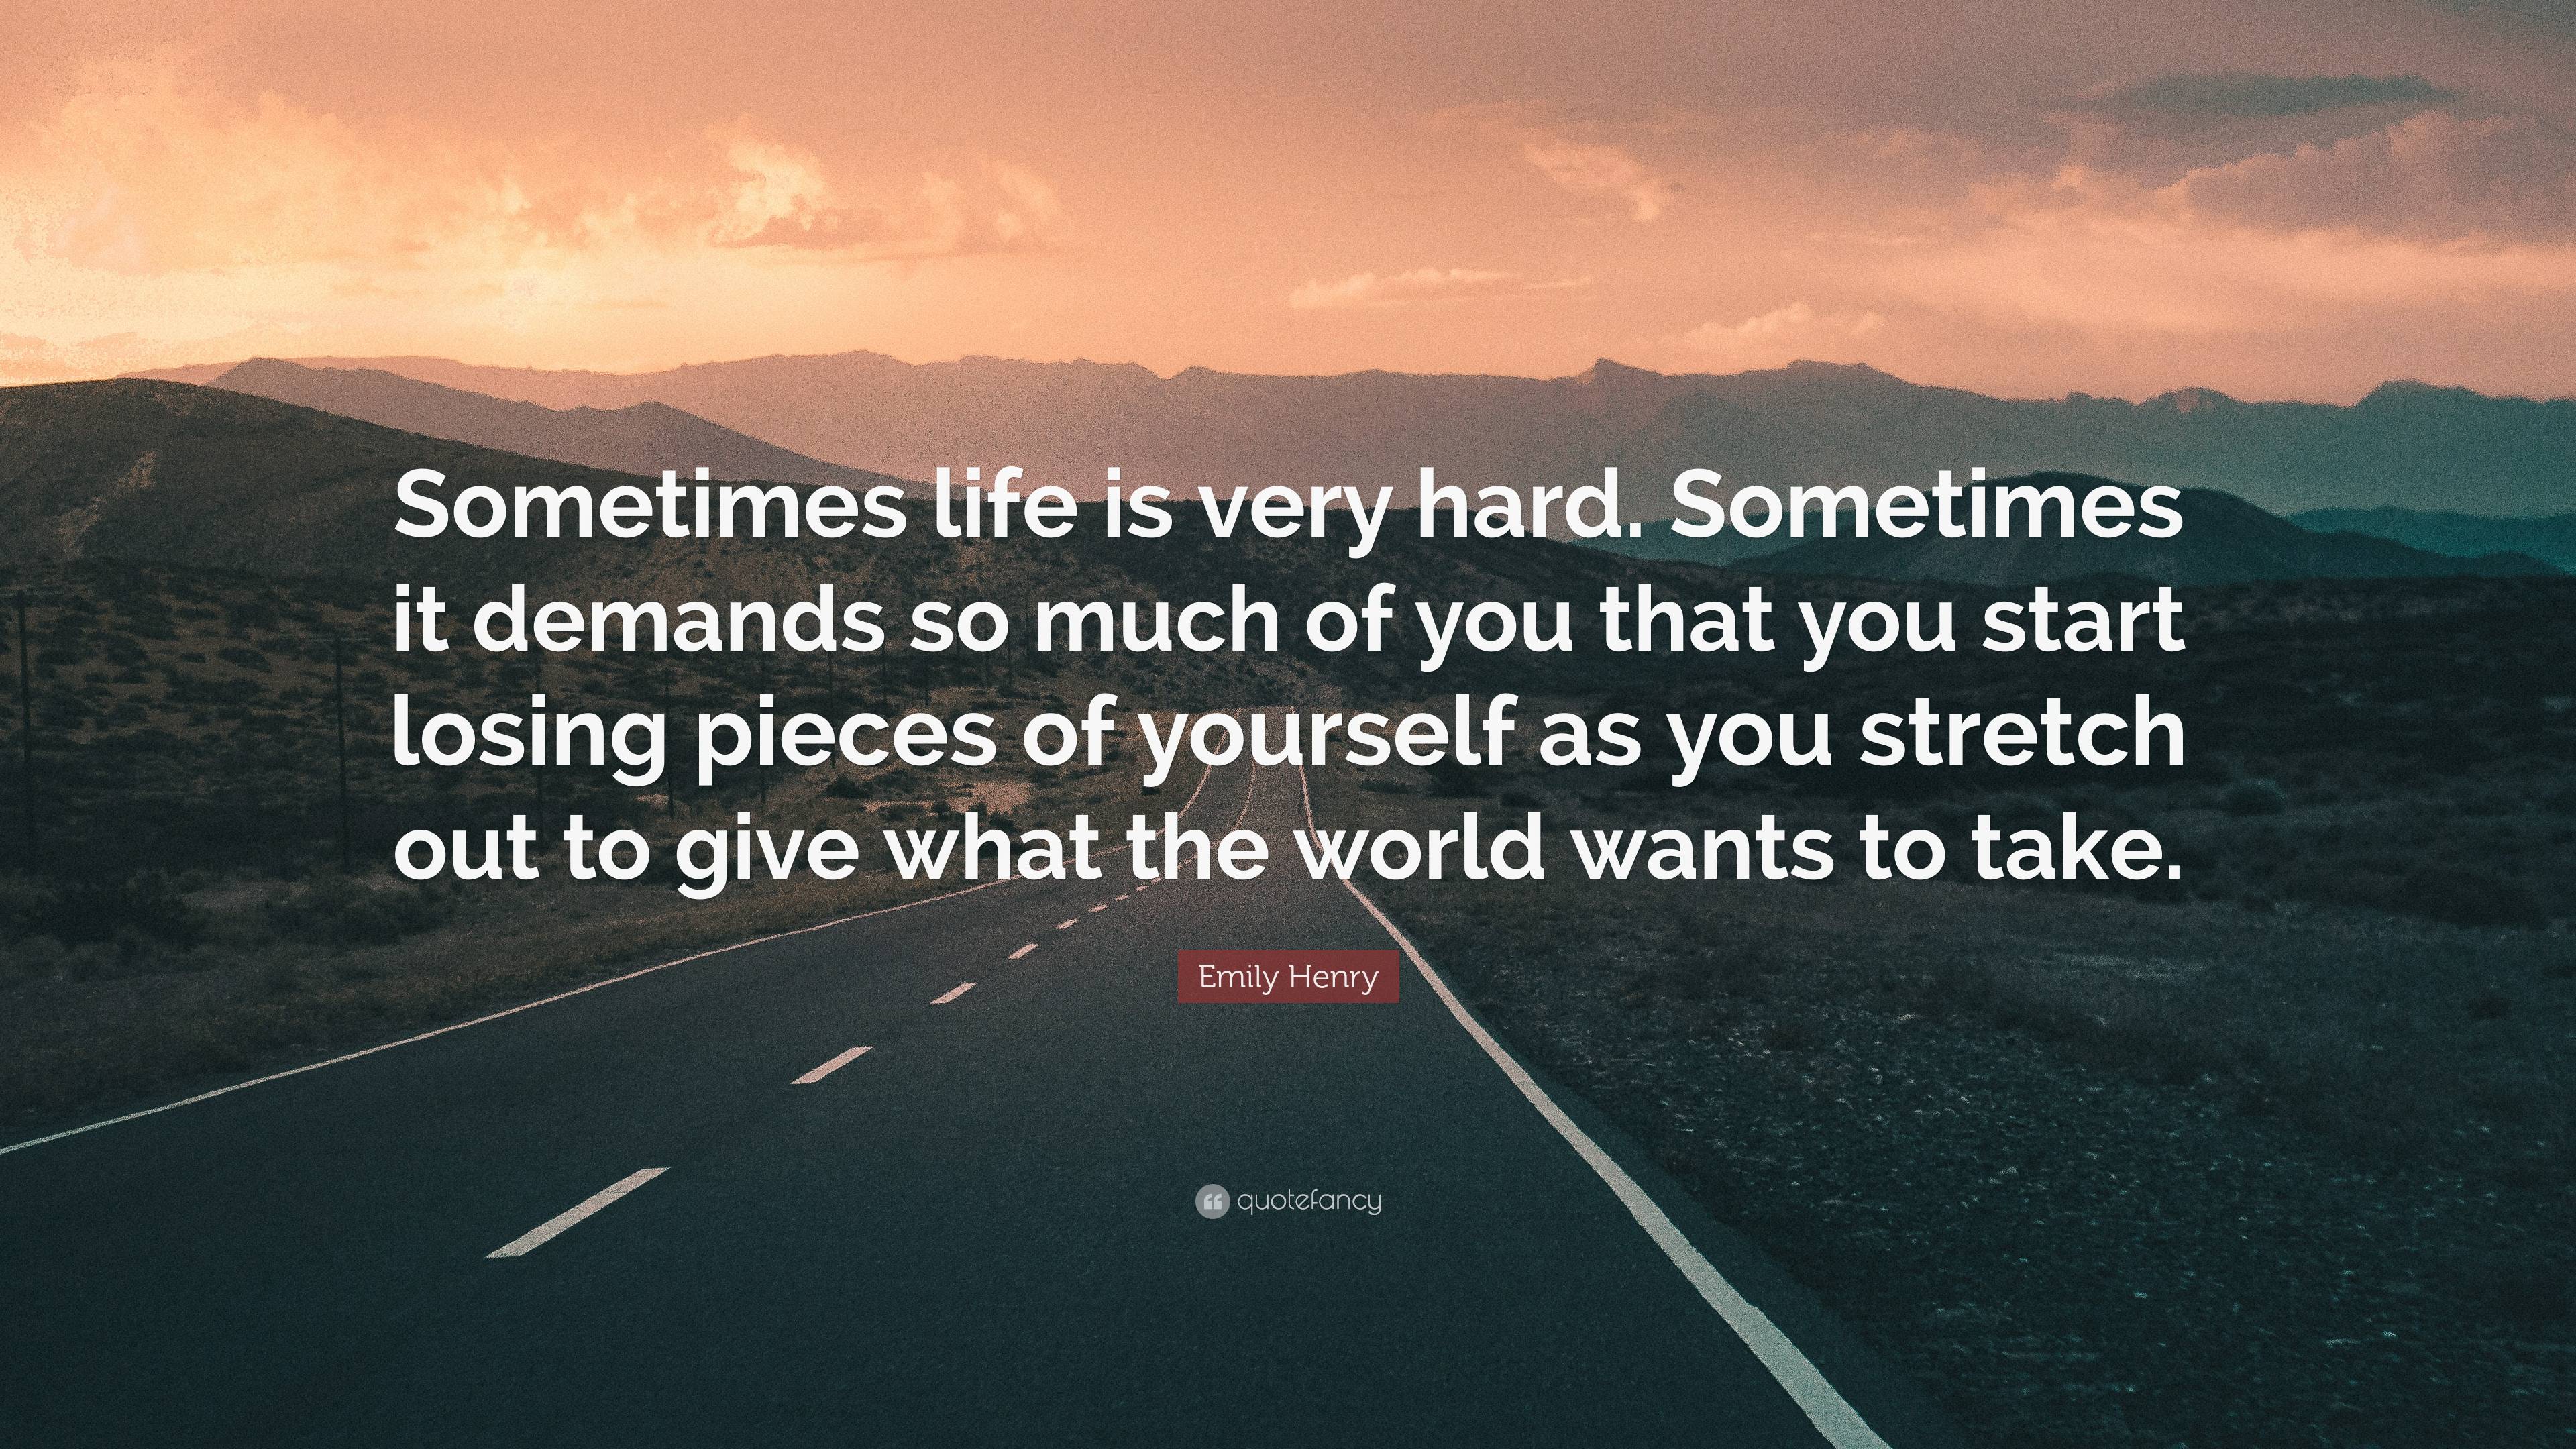 Emily Henry Quote: “Sometimes life is very hard. Sometimes it demands so  much of you that you start losing pieces of yourself as you stretch”